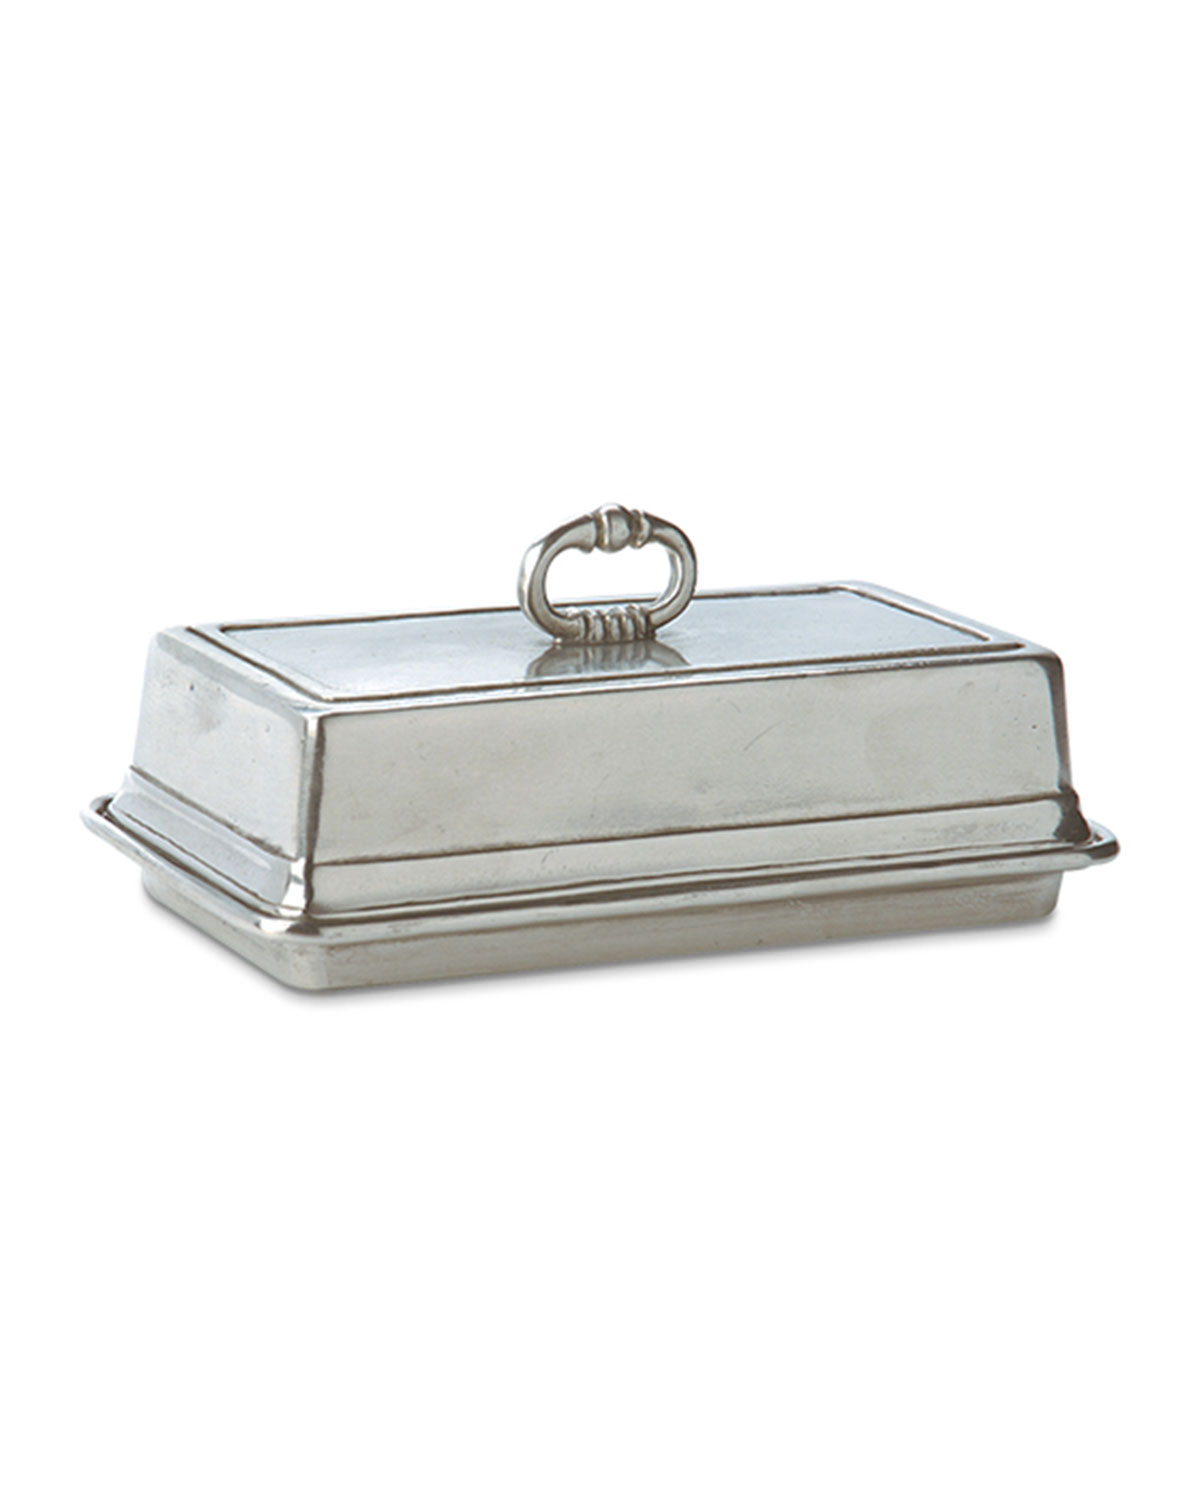 Shop Match Covered Butter Dish